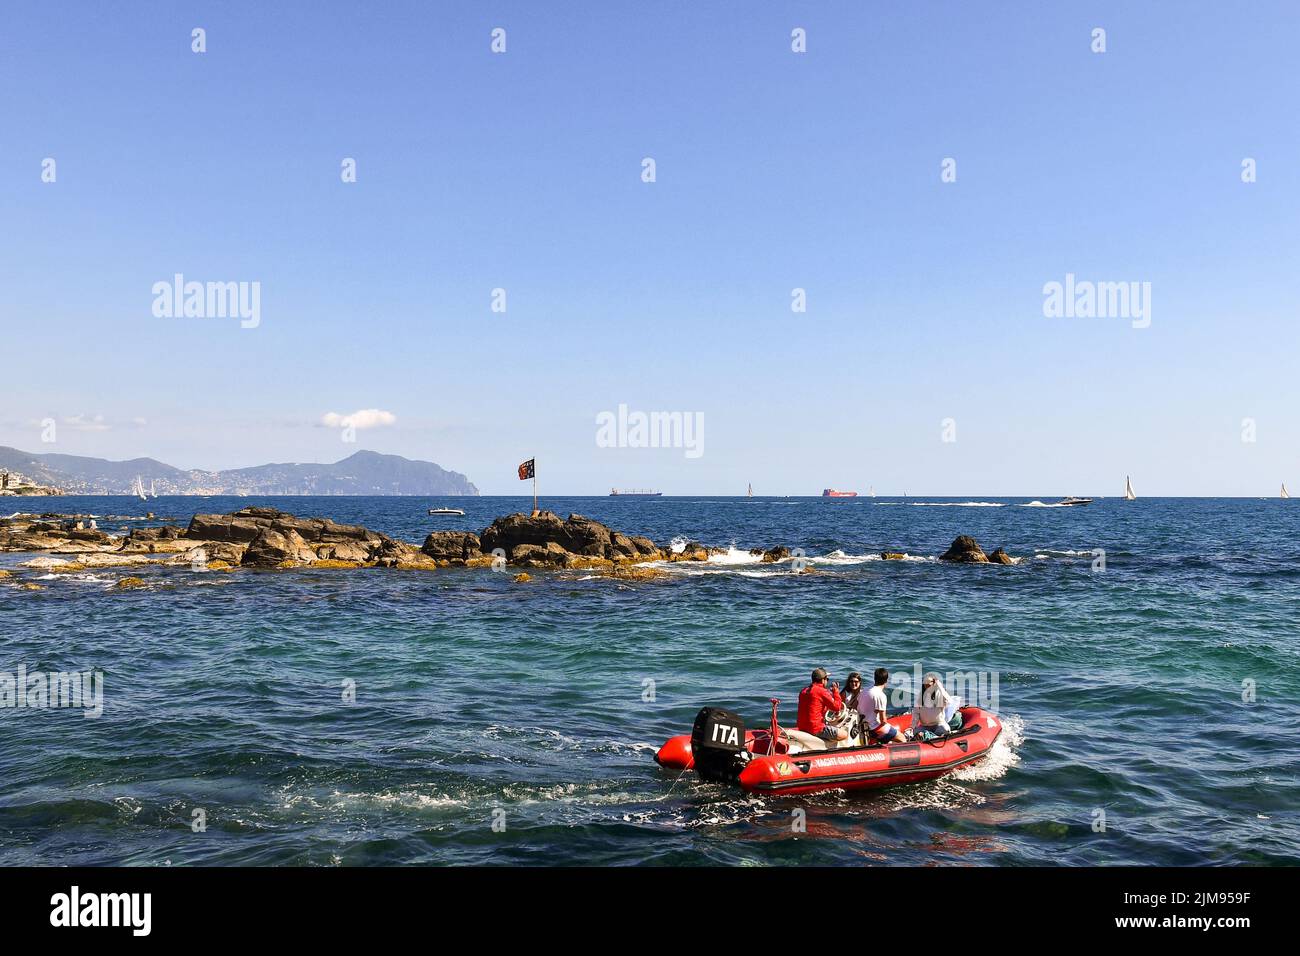 Two young couples sailing on a dinghy with the promontory of Portofino in the background, Boccadasse, Genoa, Liguria, Italy Stock Photo